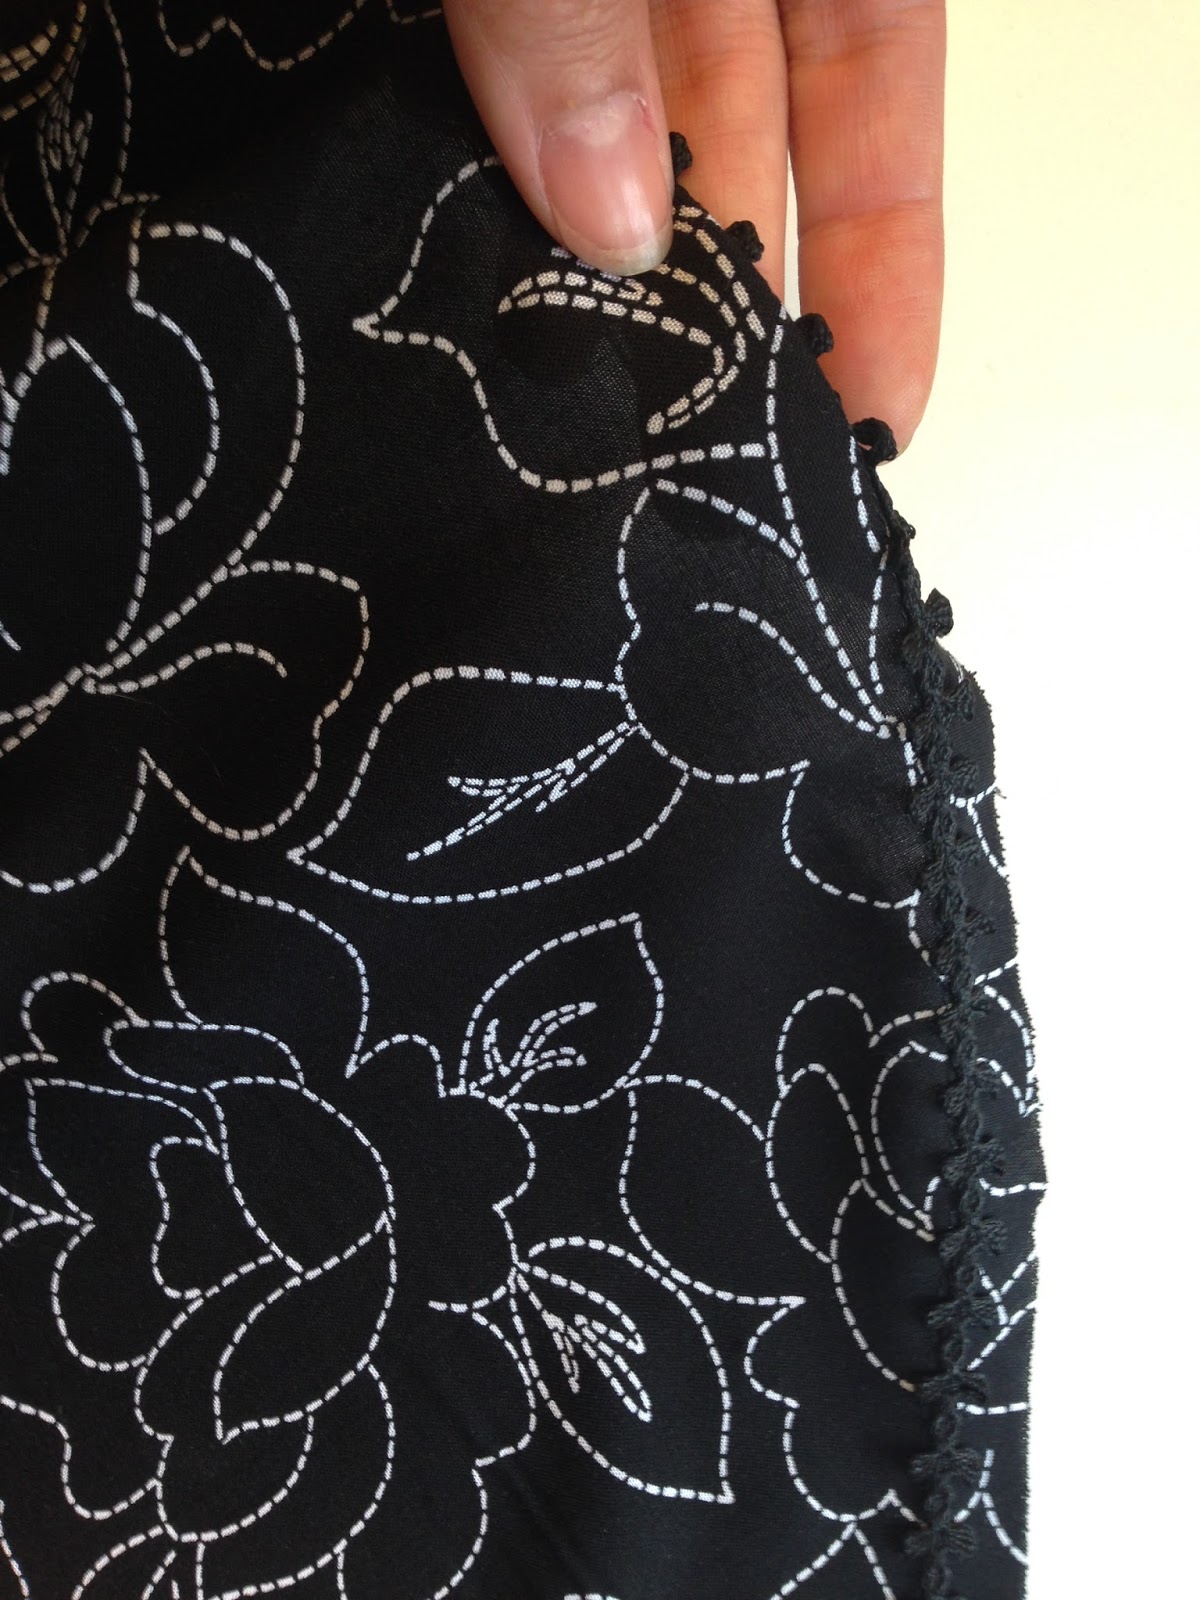 Gertie's New Blog for Better Sewing: Butterick 6217 in Stitchy Rose Challis